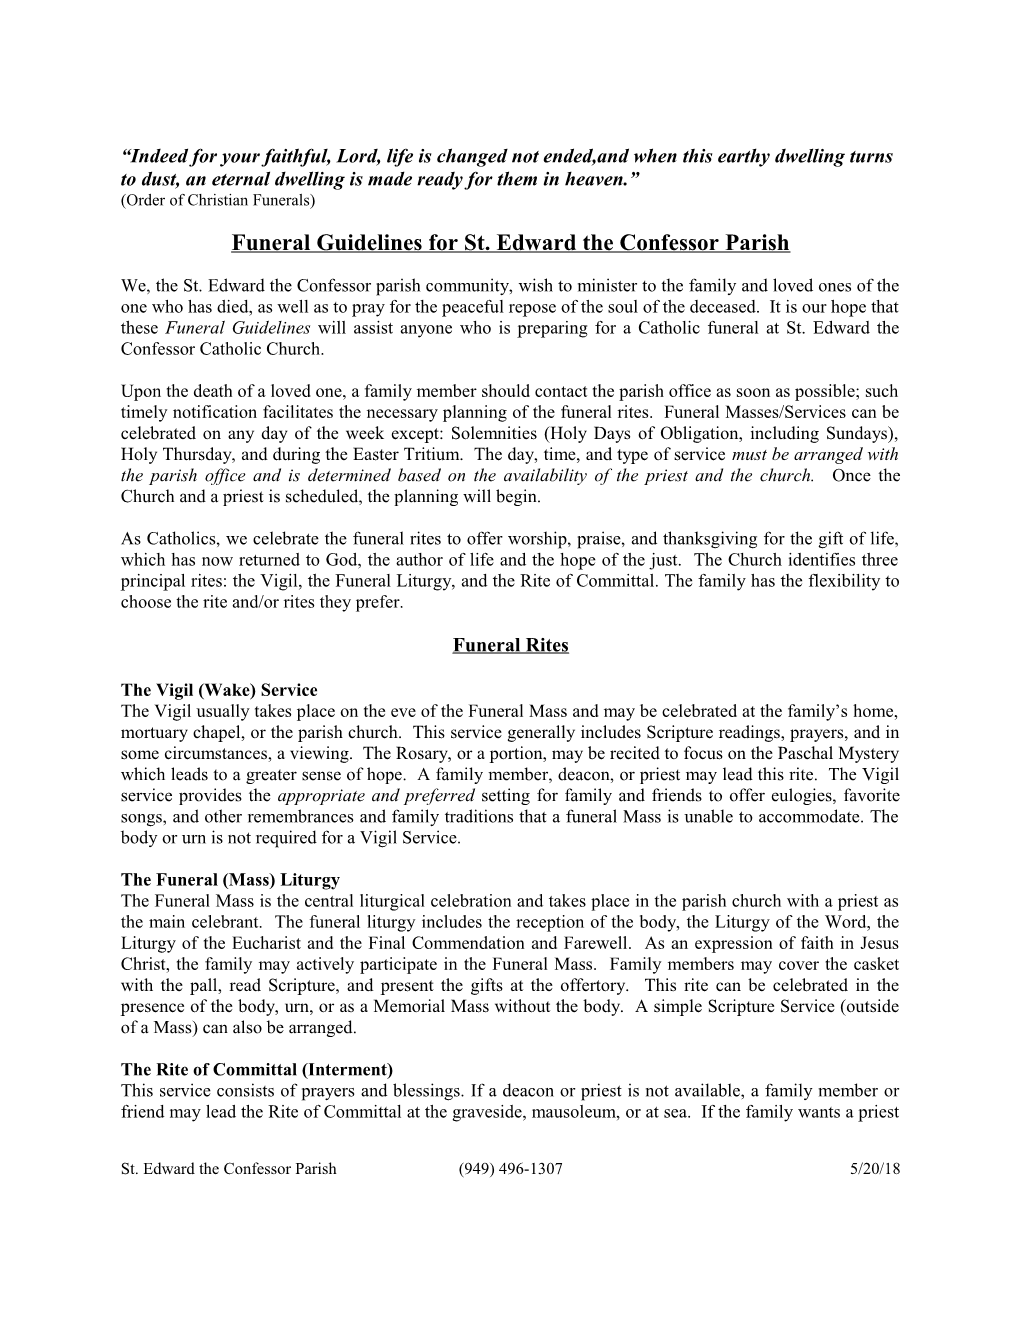 Funeral Guidelines for St. Edward the Confessor Parish